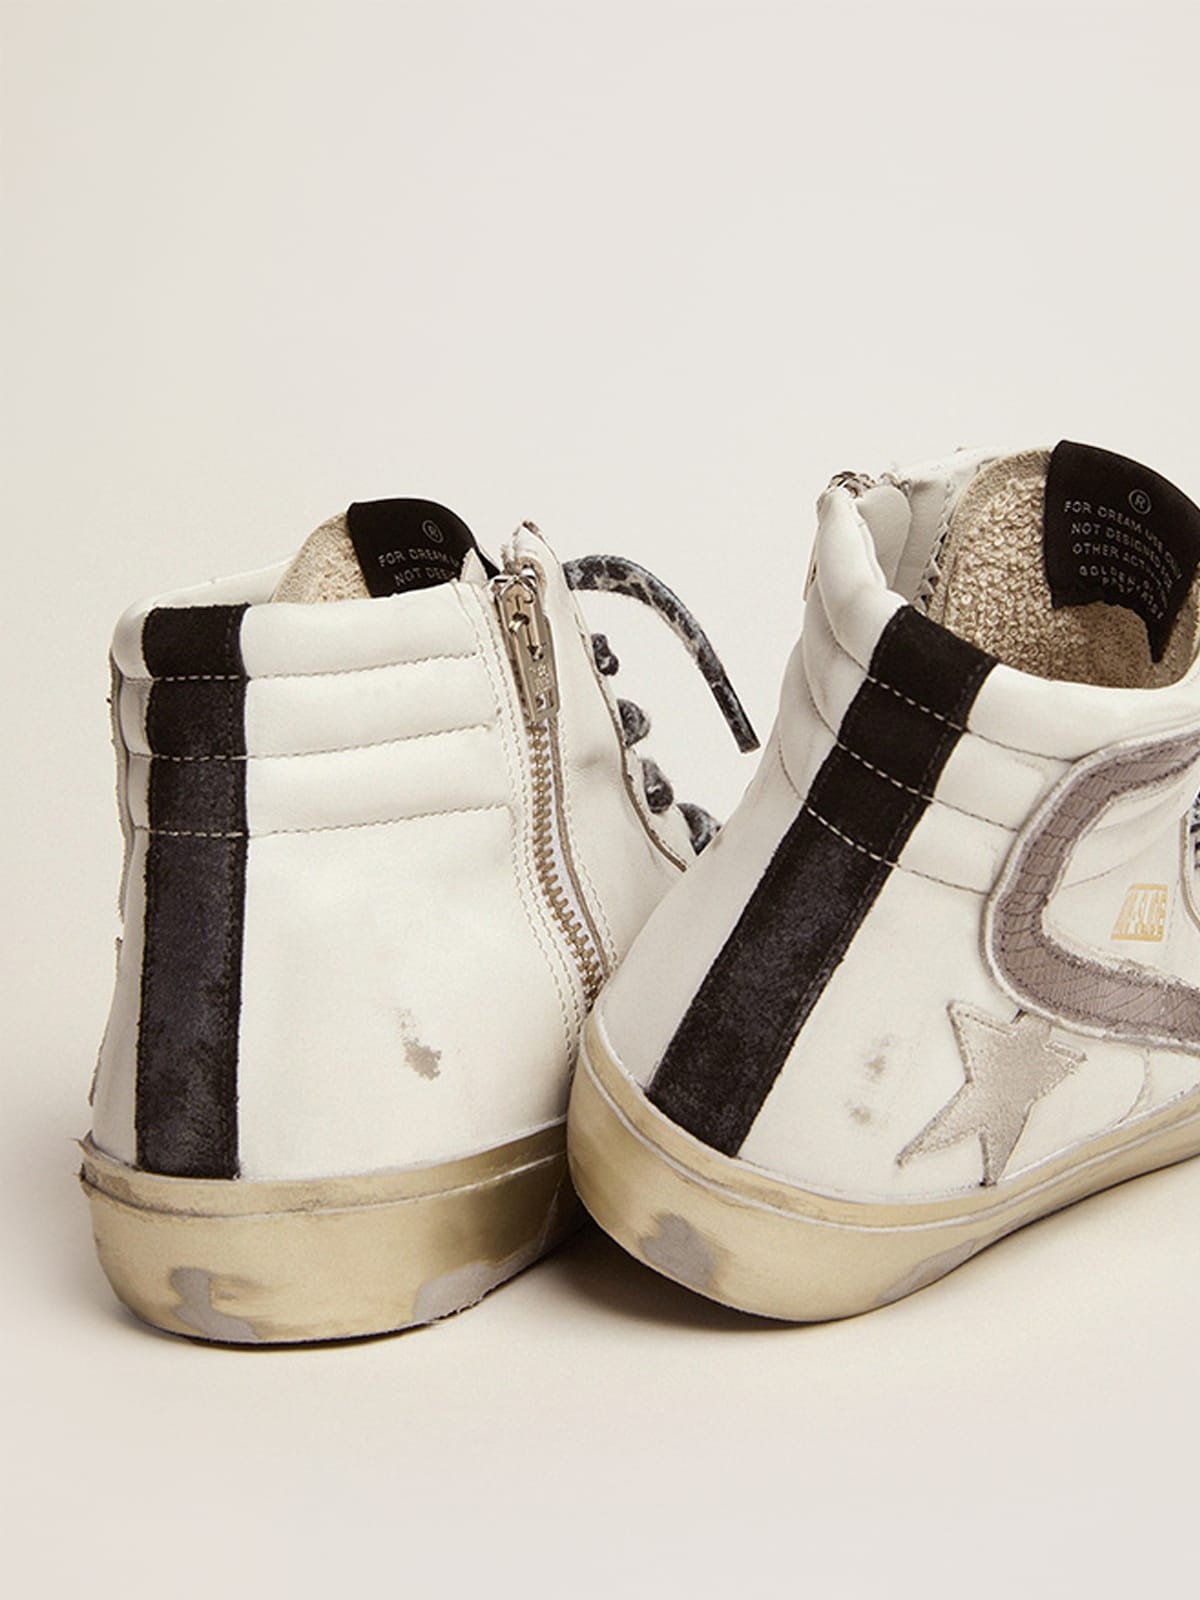 Slide sneakers with white suede star and dove-gray lizard-print leather flash - 5